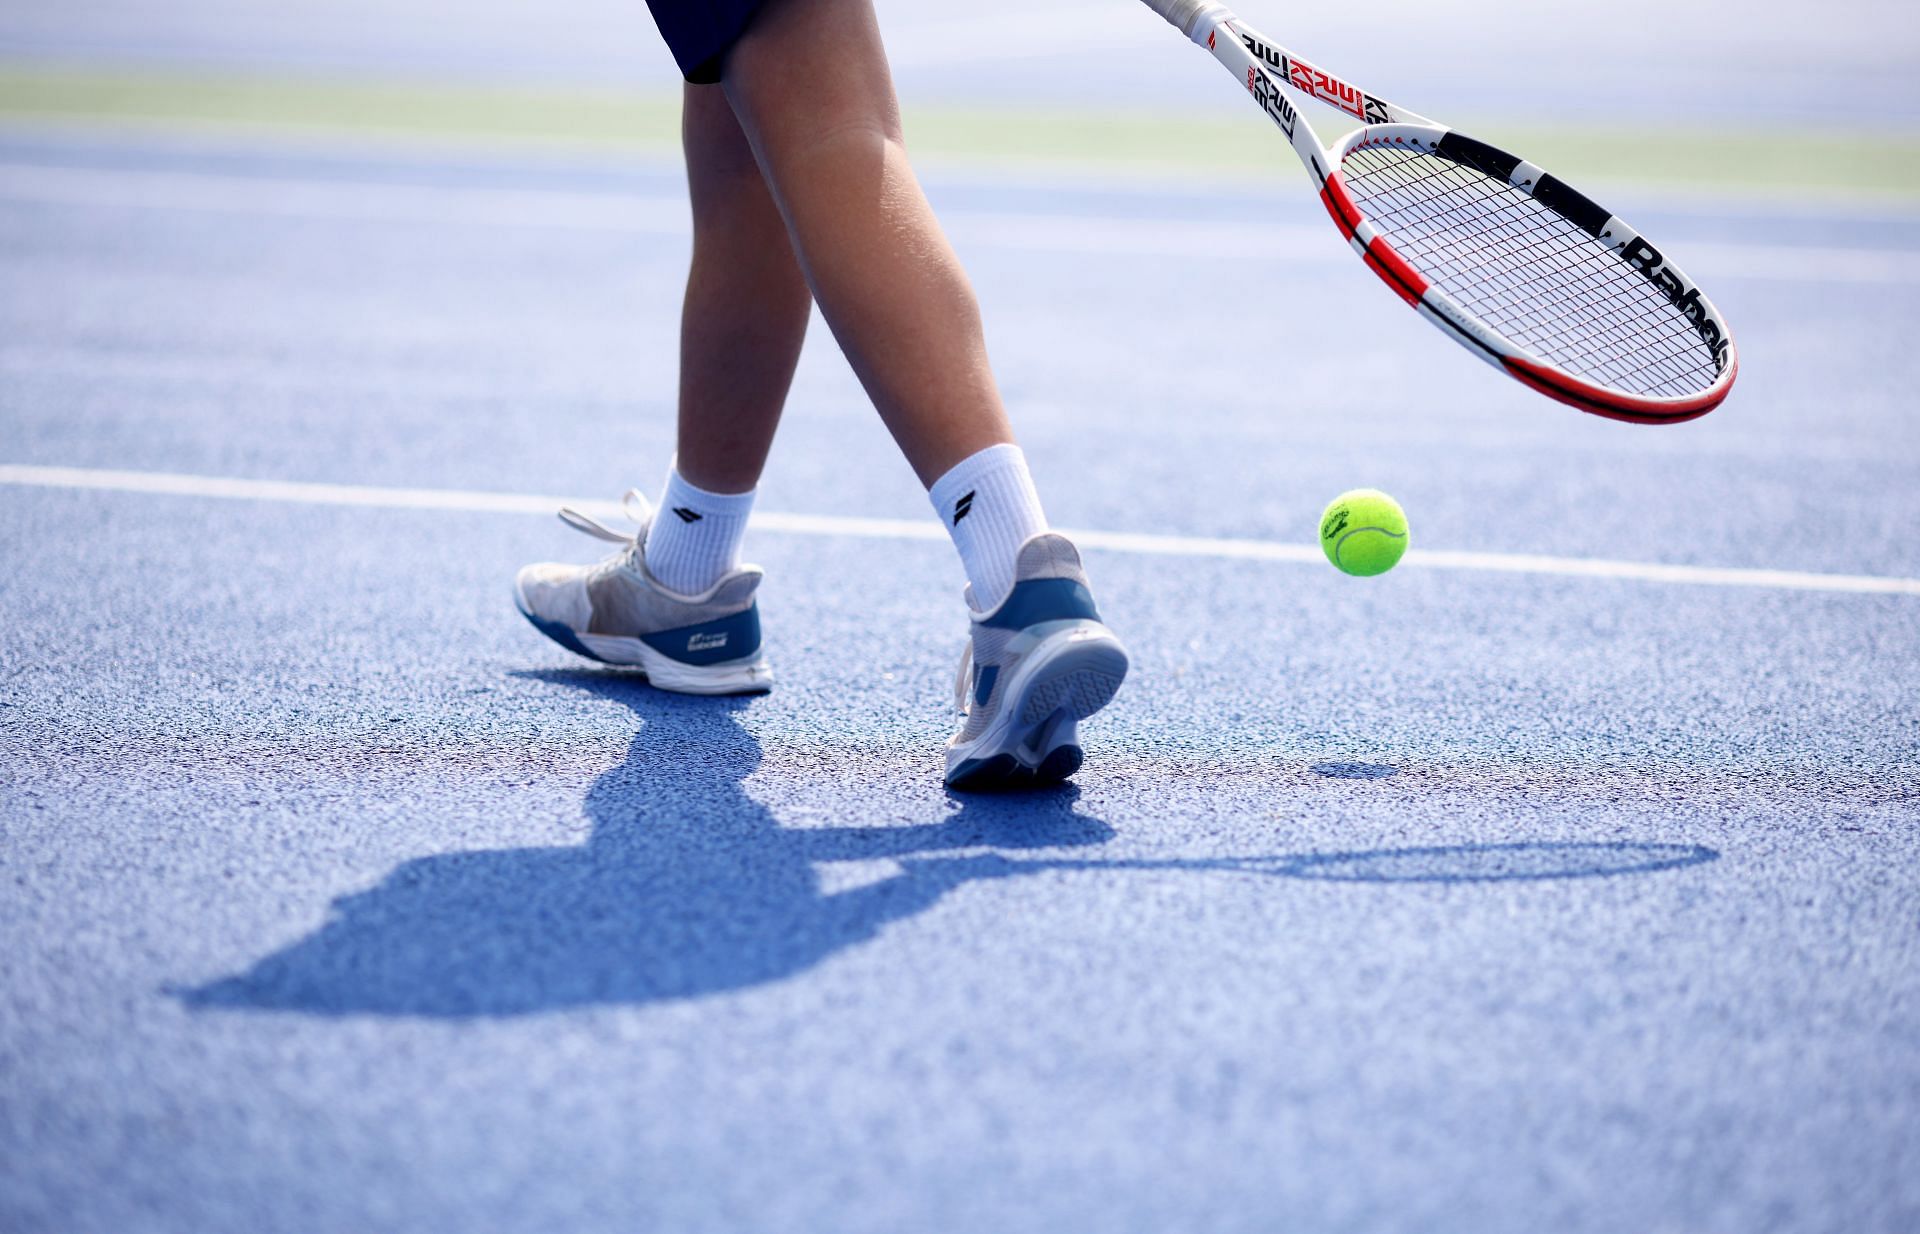 There is a huge financial disparty among players in the sport of tennis. 